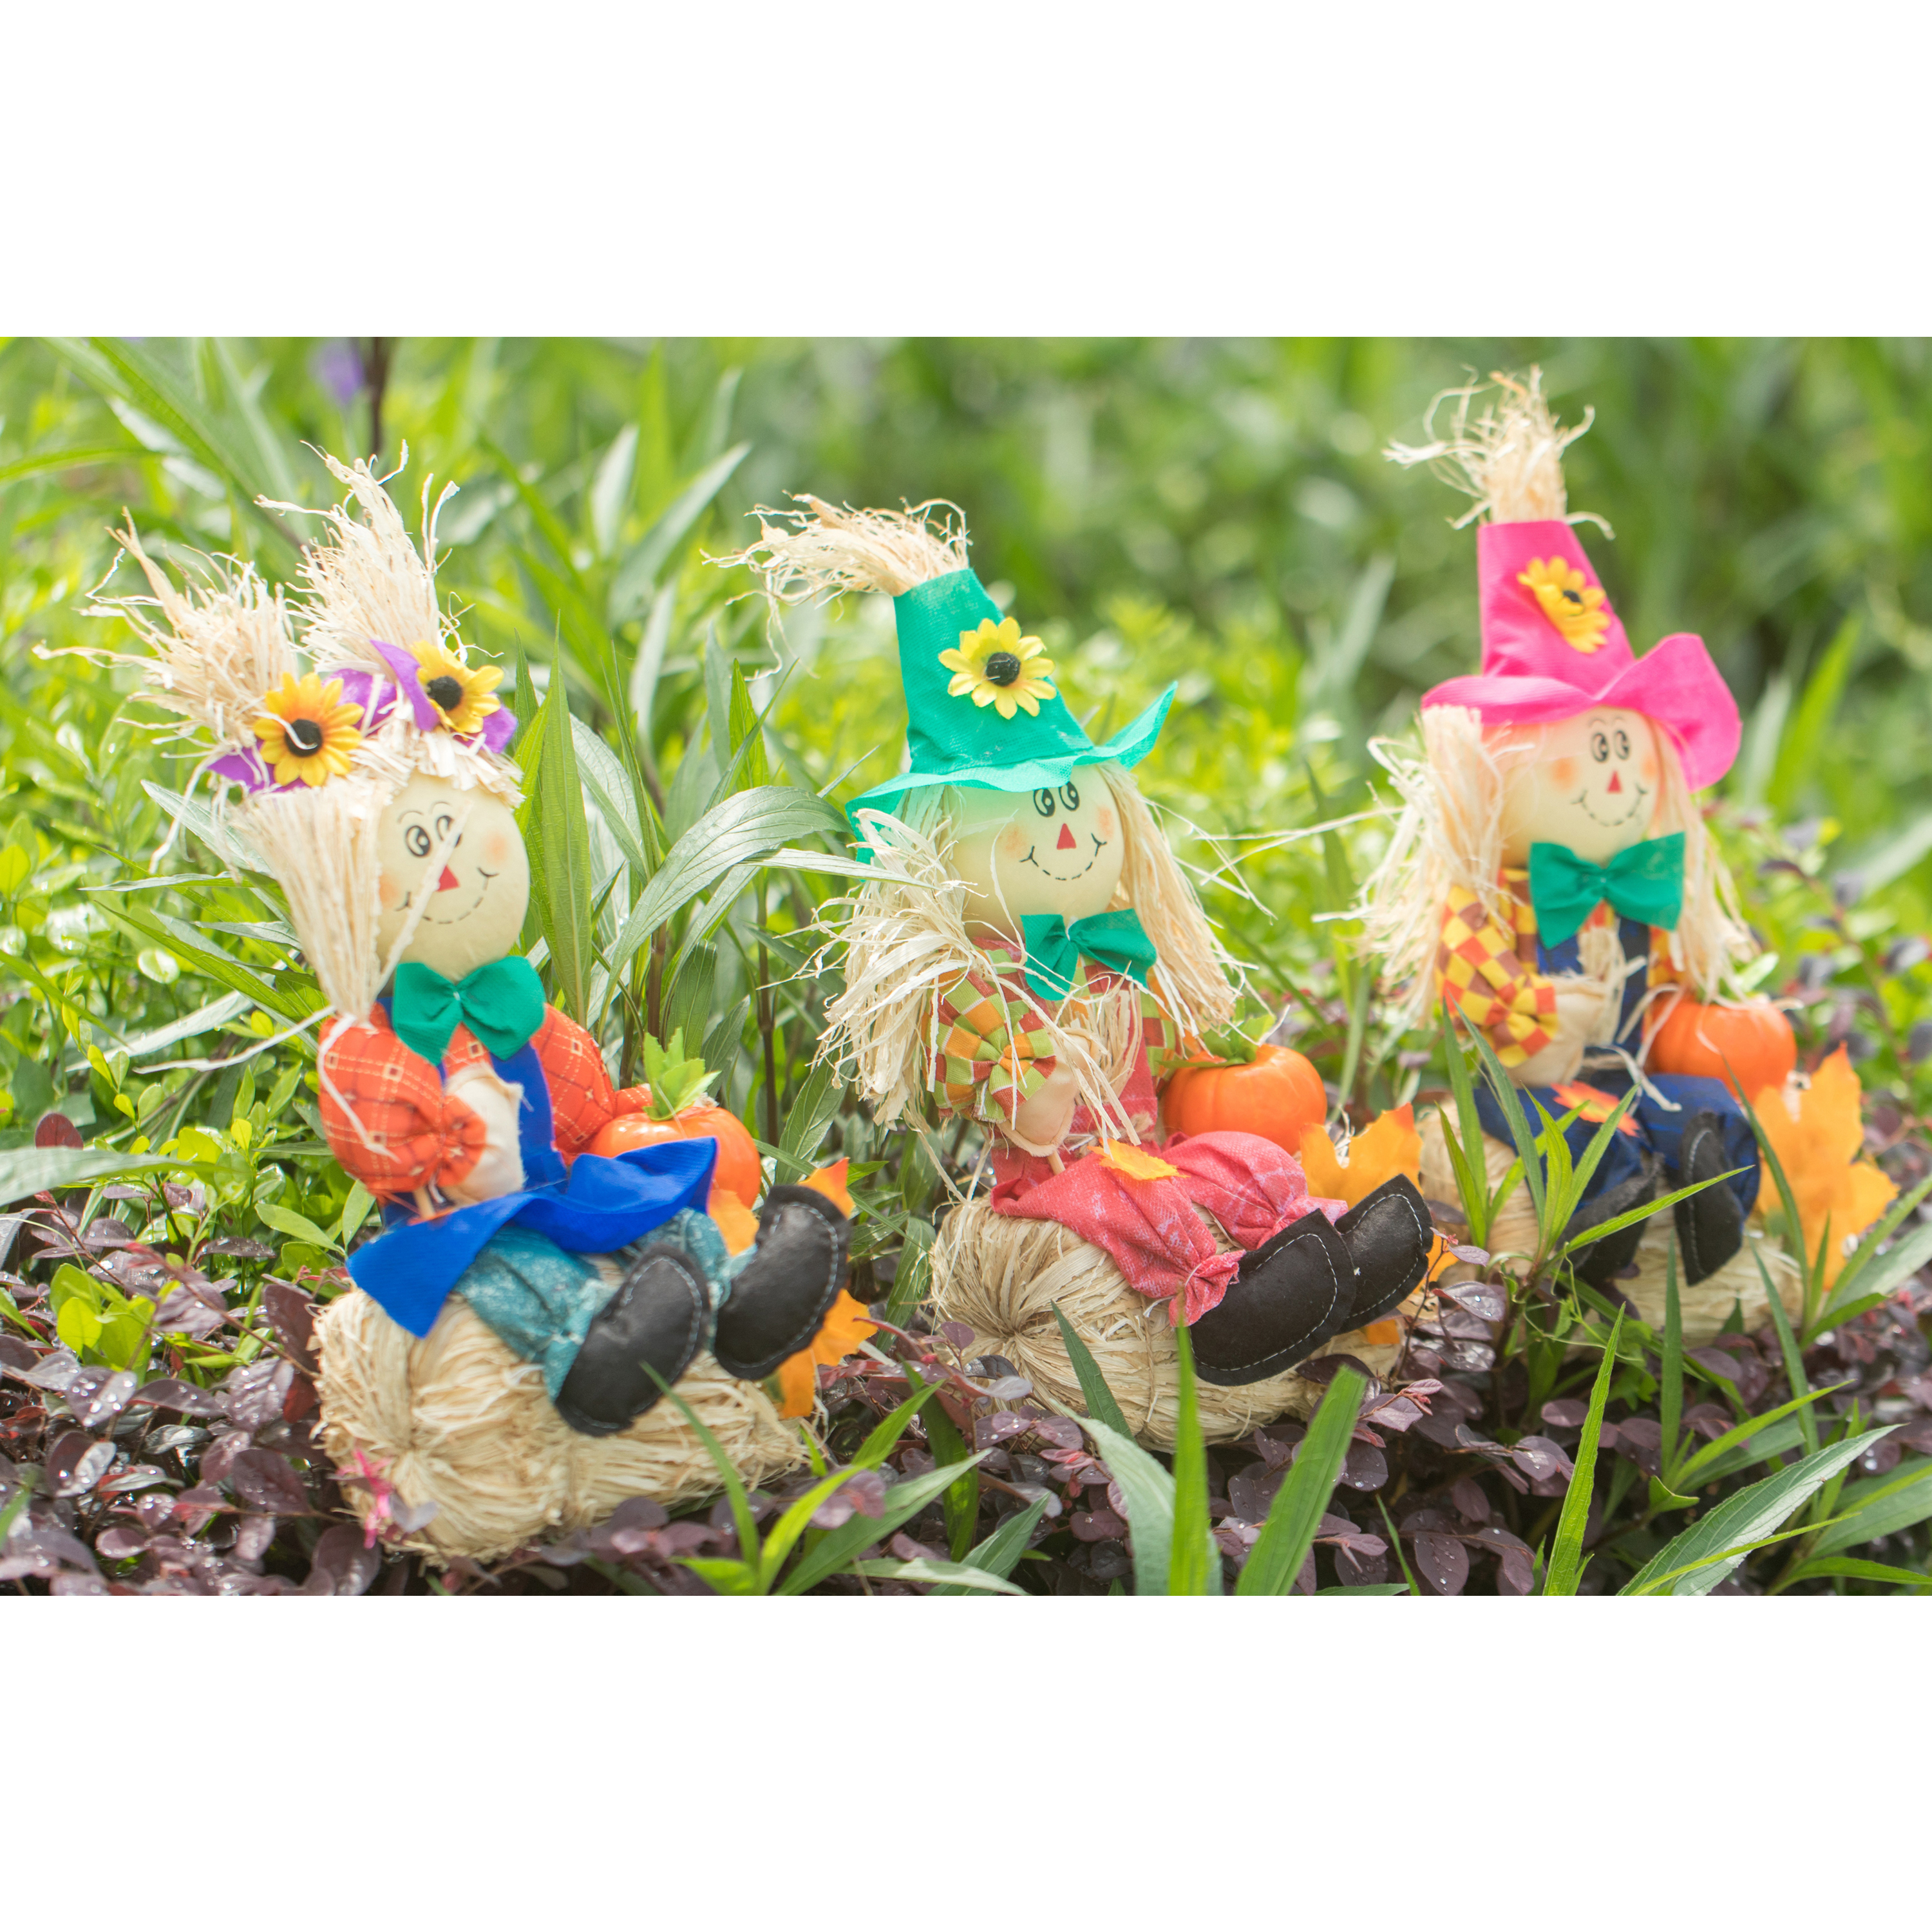 Set Of 3 Garden Scarecrows Sitting On Hay Bale